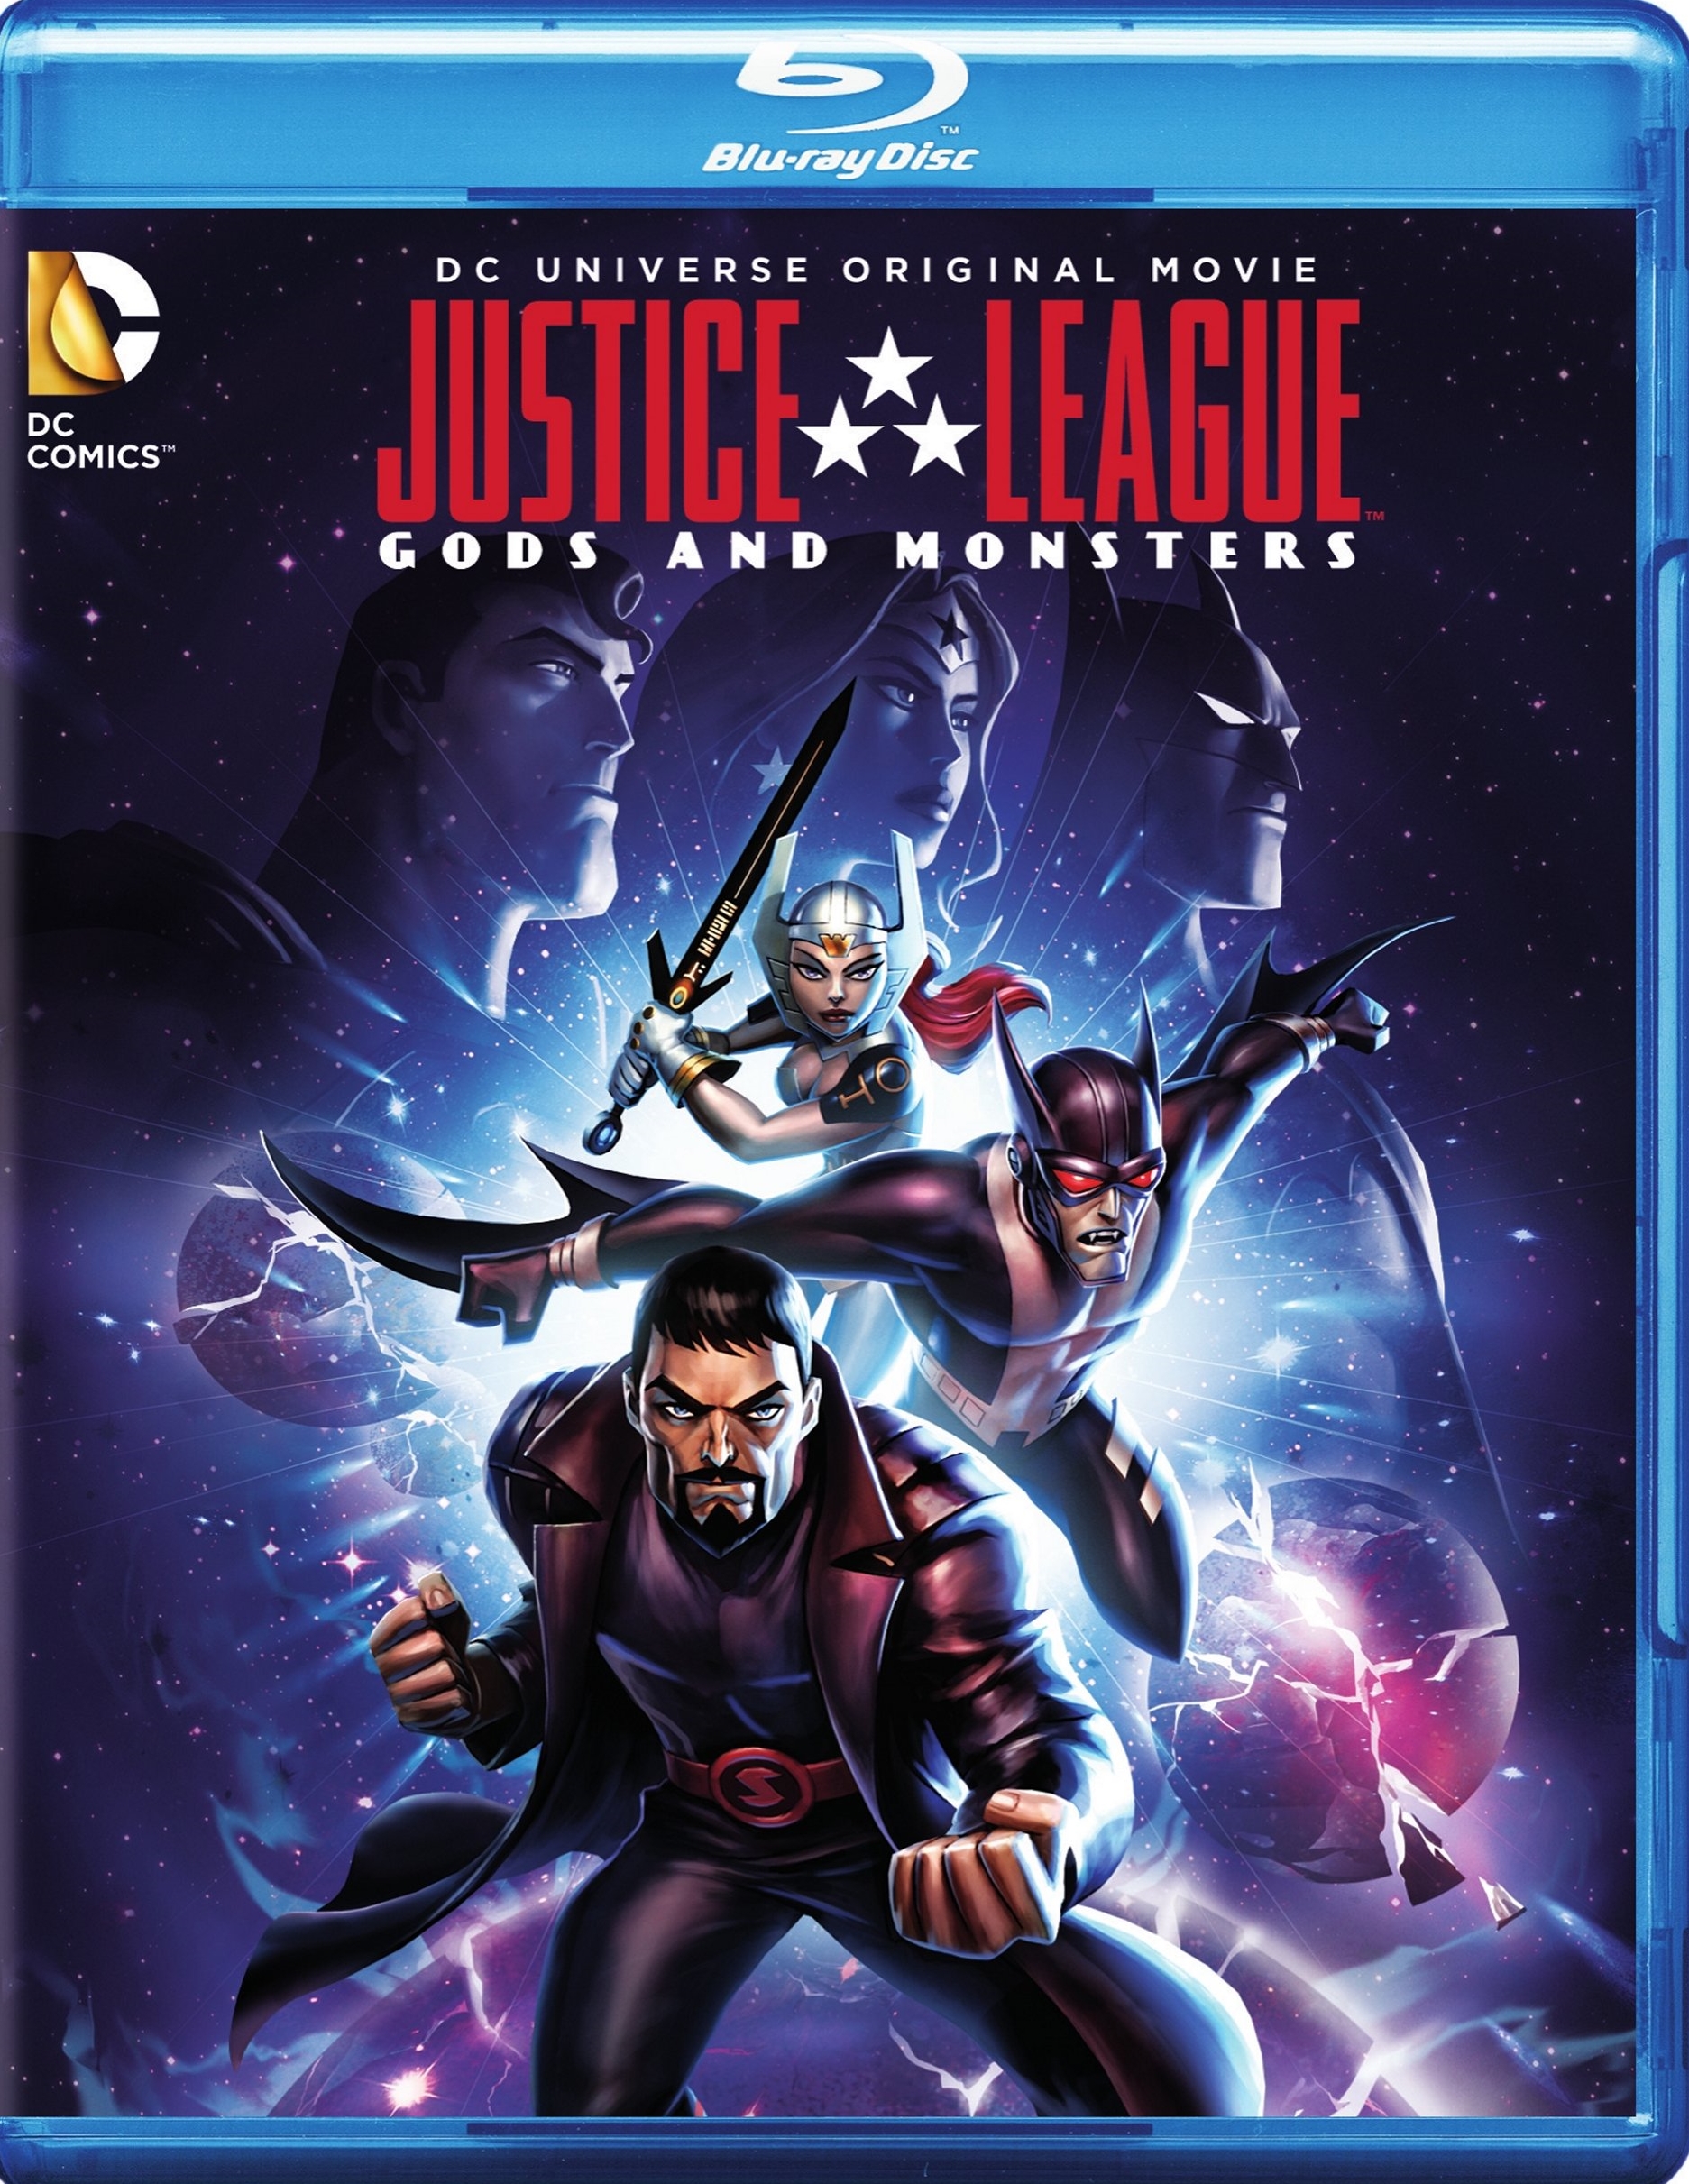 Justice League: Gods and Monsters [Blu-ray] [2015] - Best Buy